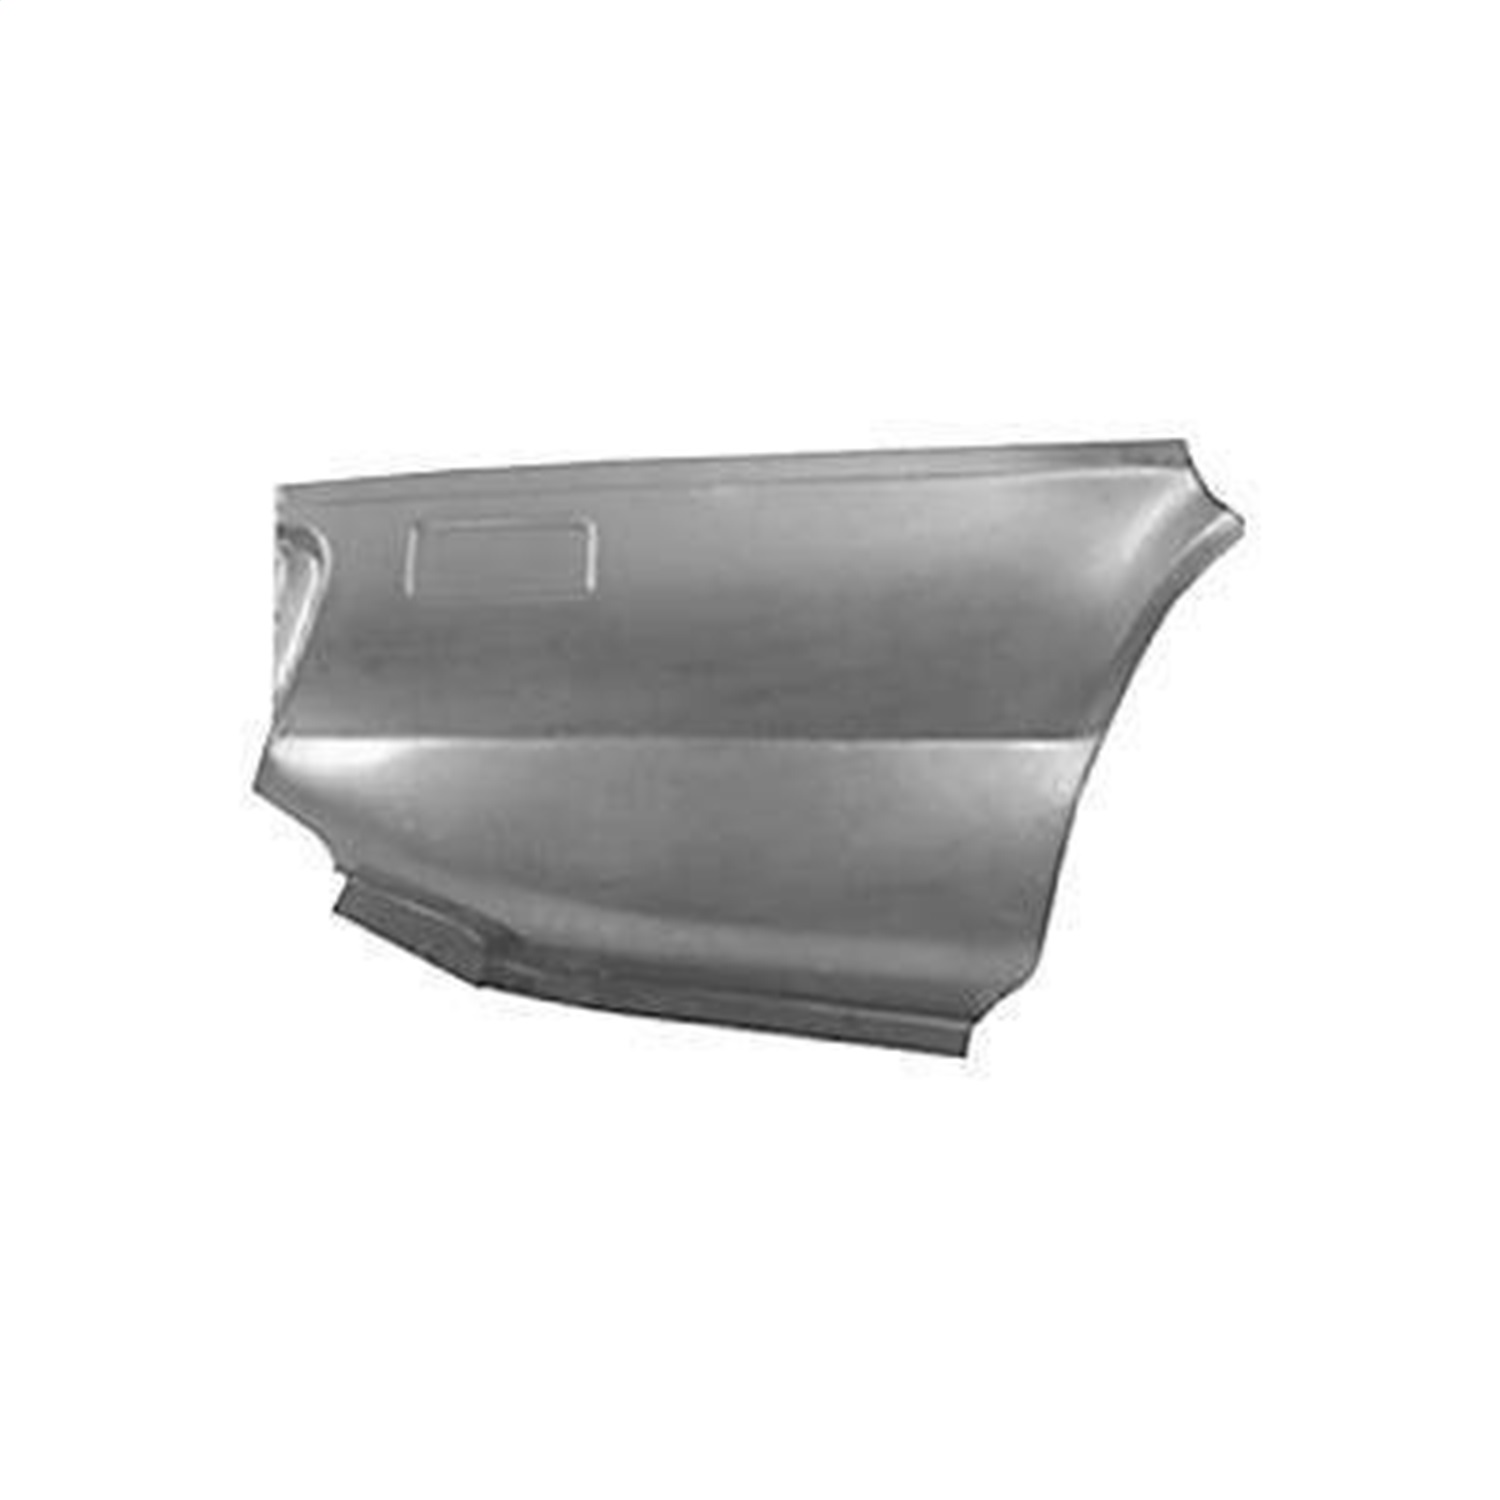 Lower Rear Quarter Panel Section 1971-1973 Ford Mustang